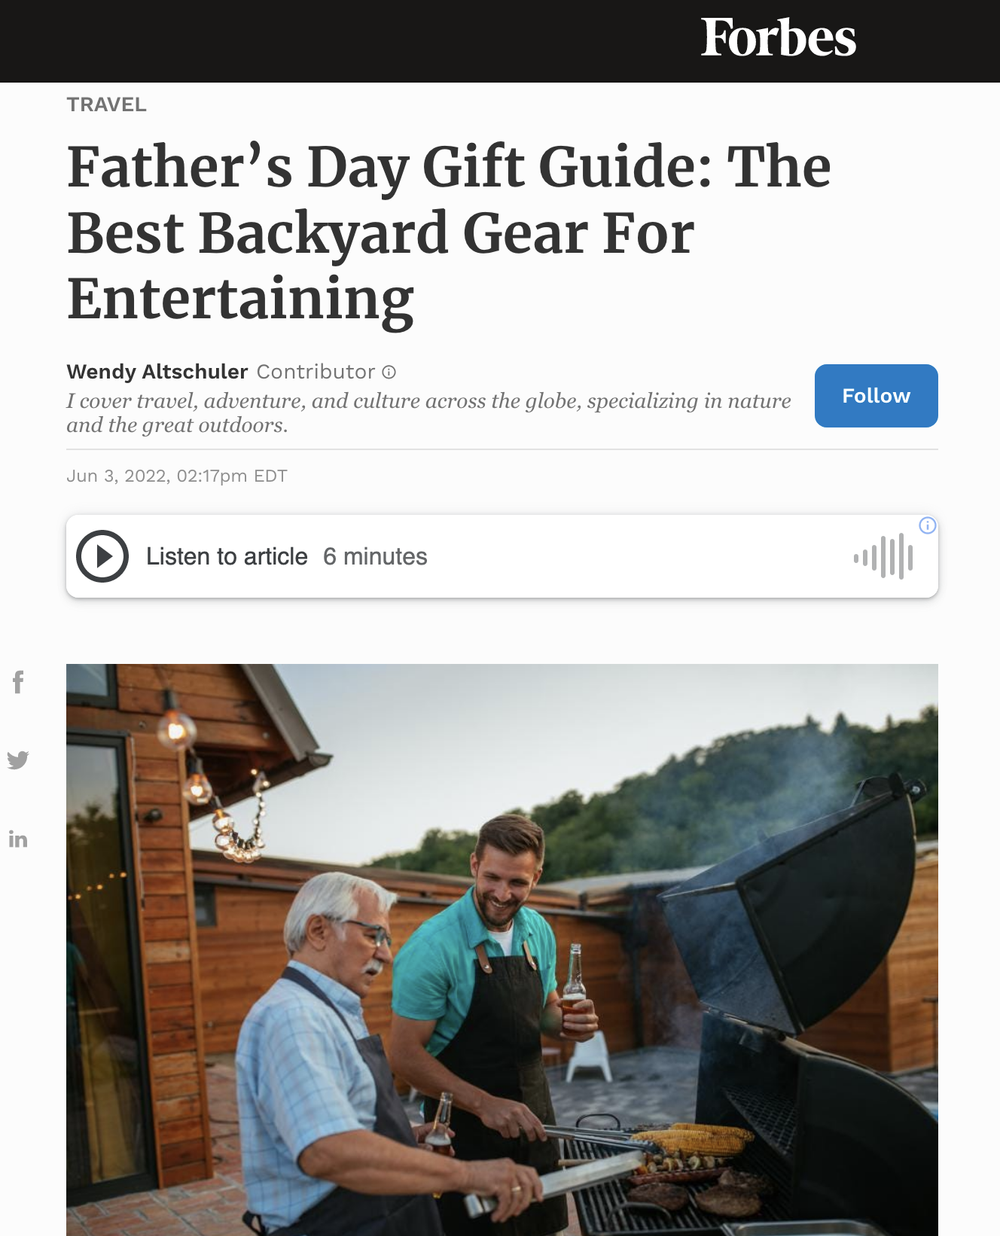 Father’s Day Gift Guide: The Best Backyard Gear For Entertaining